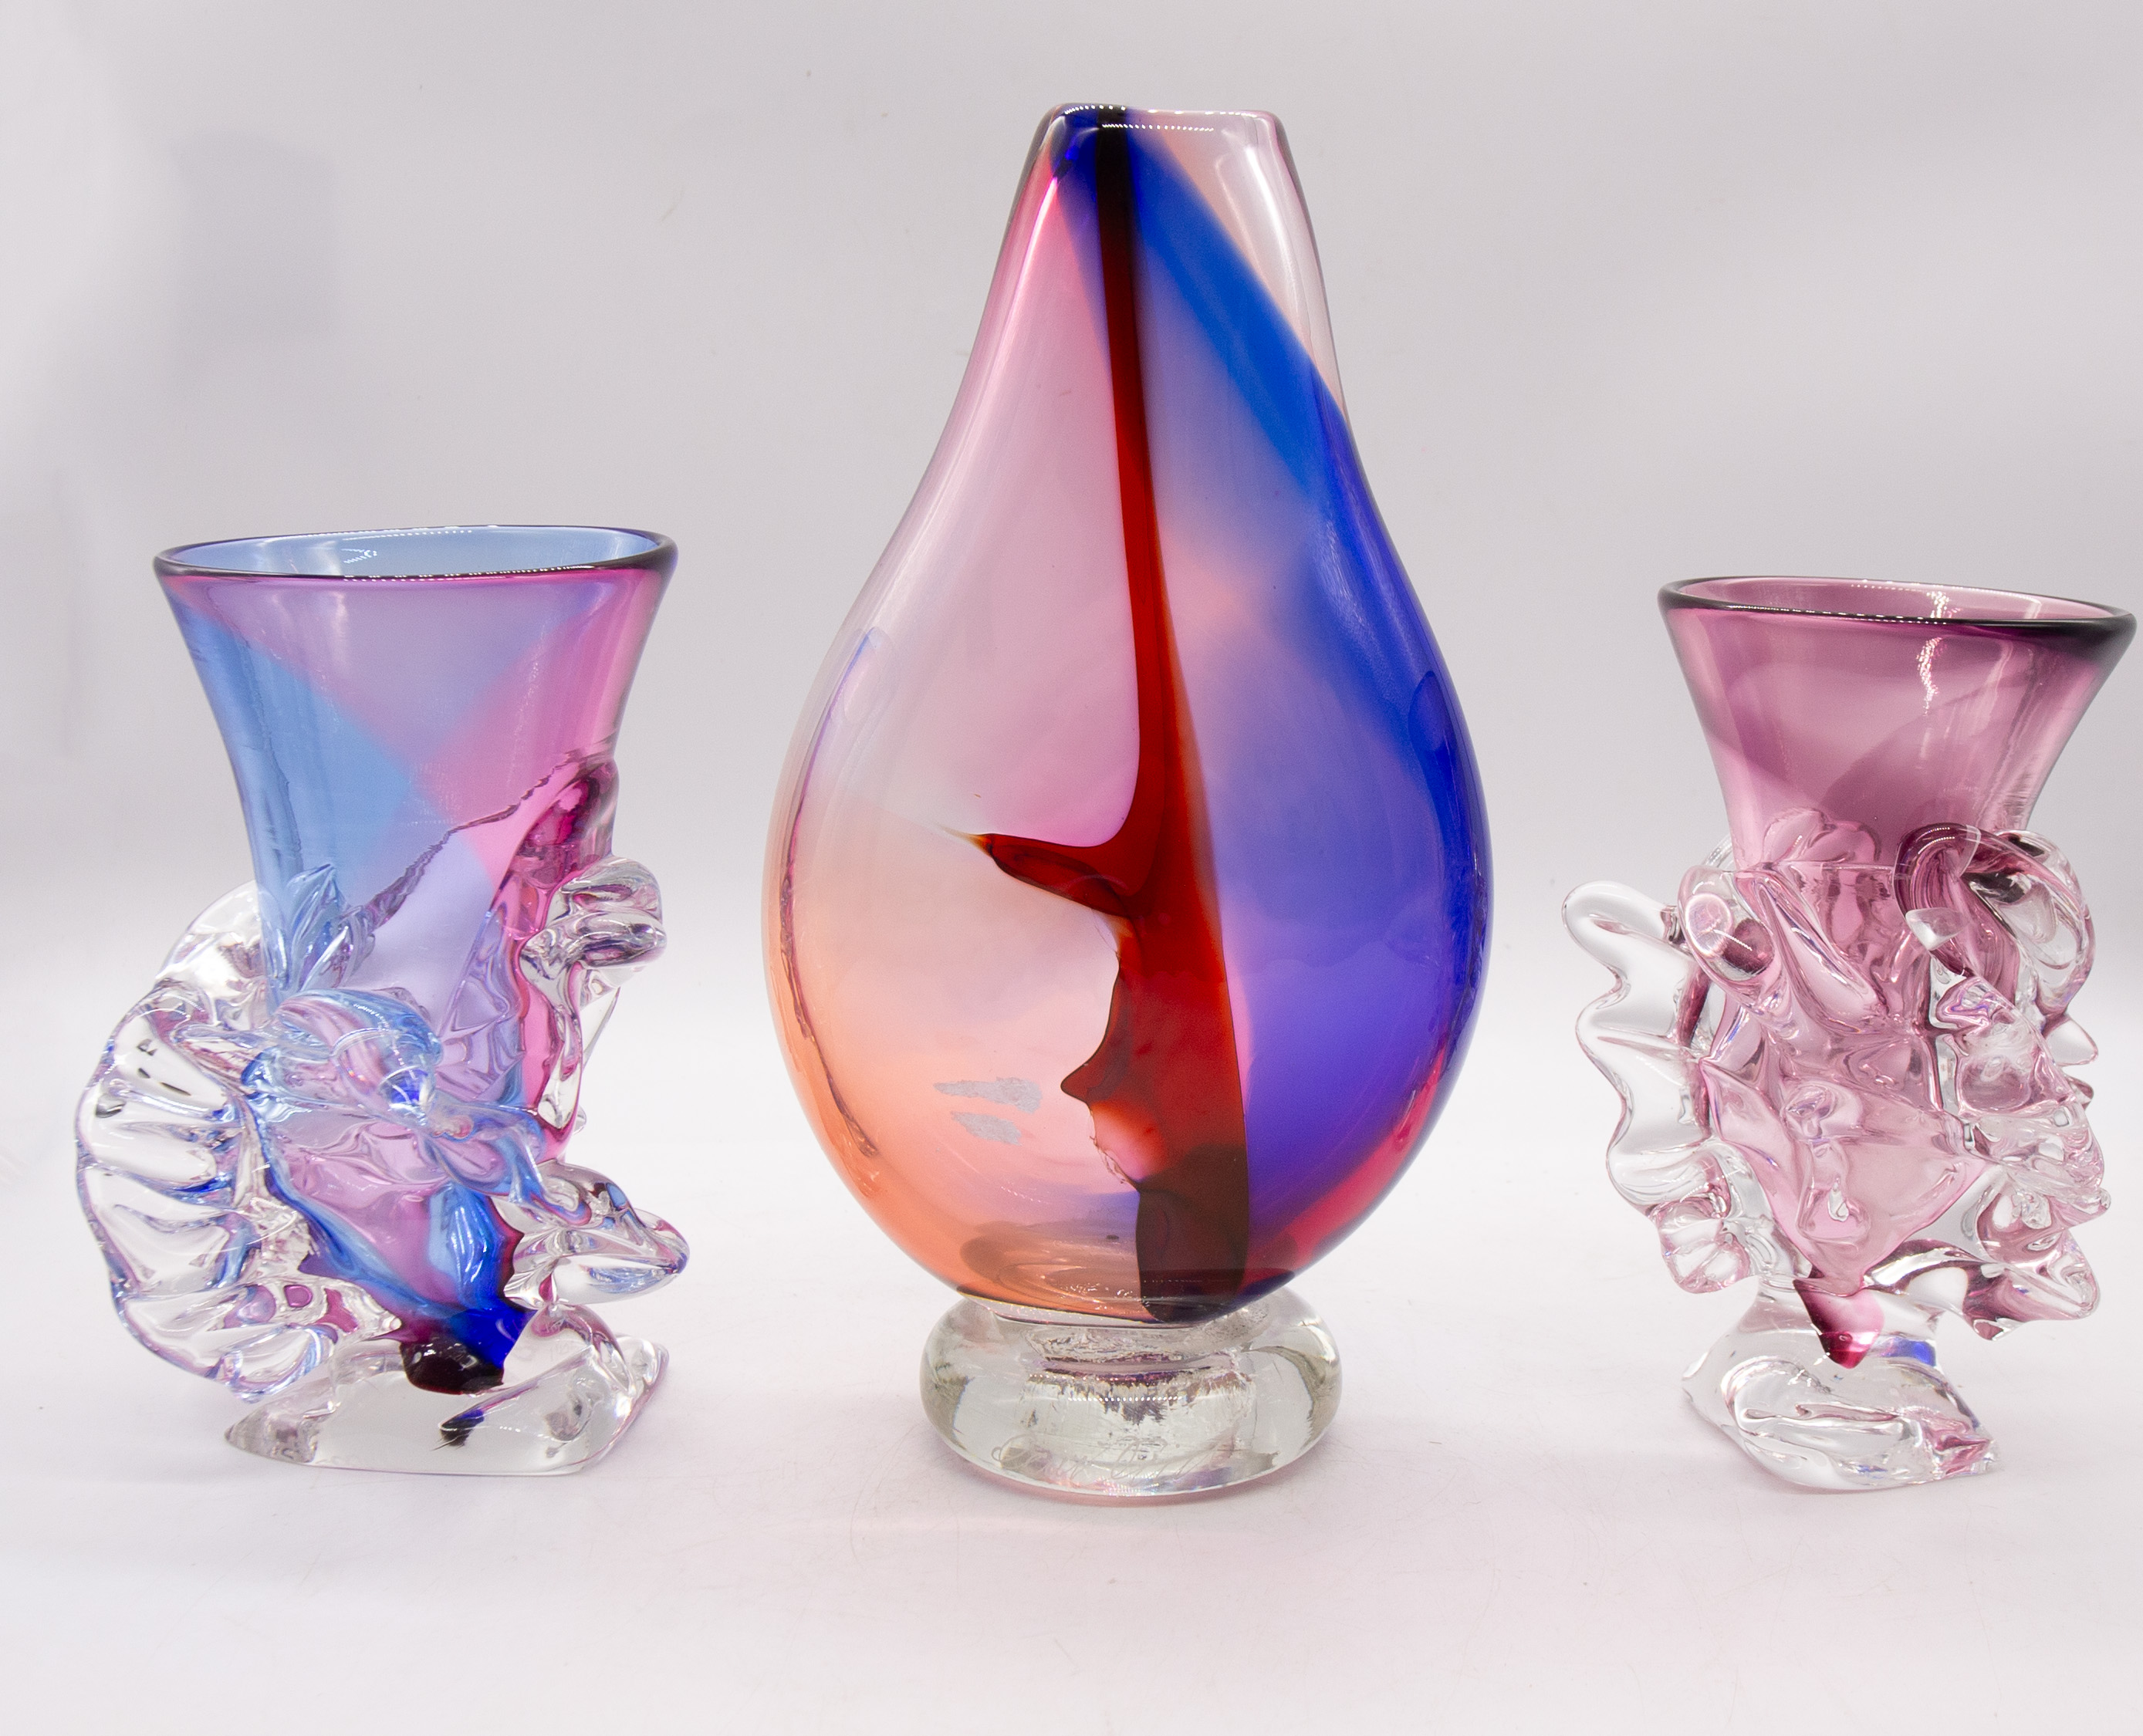 Three 20th century studio art glass vases by Gail D Gill, all in iridescent mixed blues and red